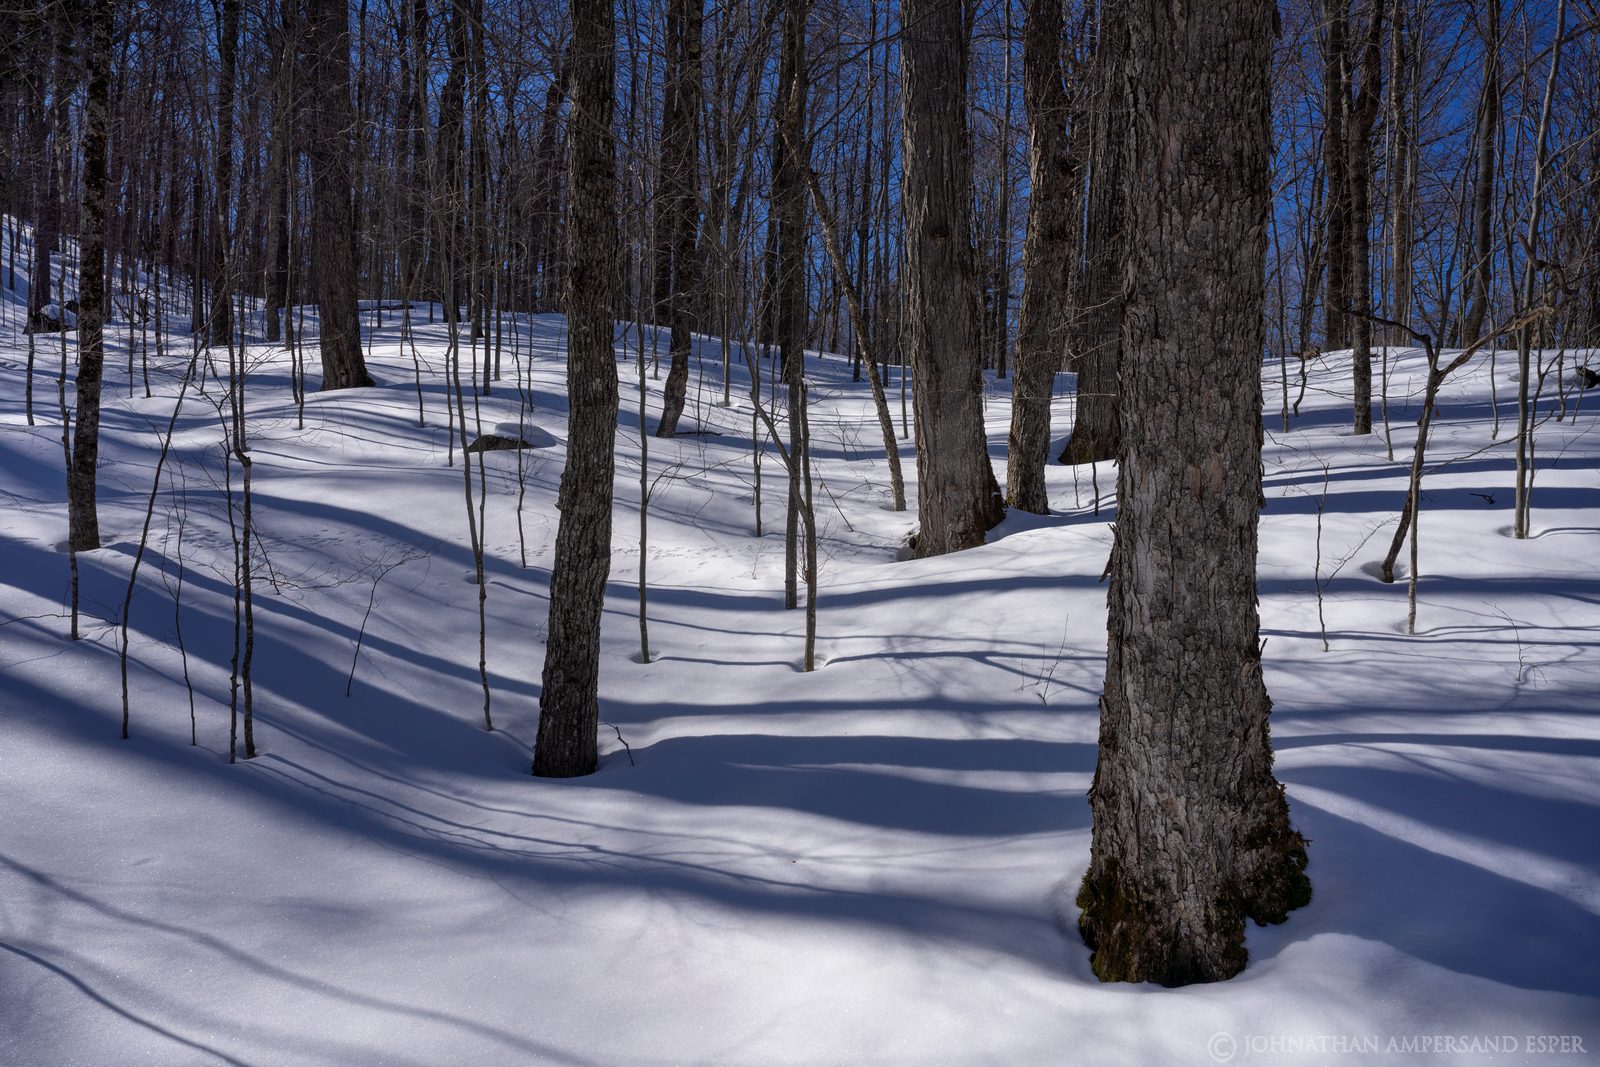 Marcy Dam trail,hardwood forest,late winter,forest,winter,trees,snow,Adirondack forest